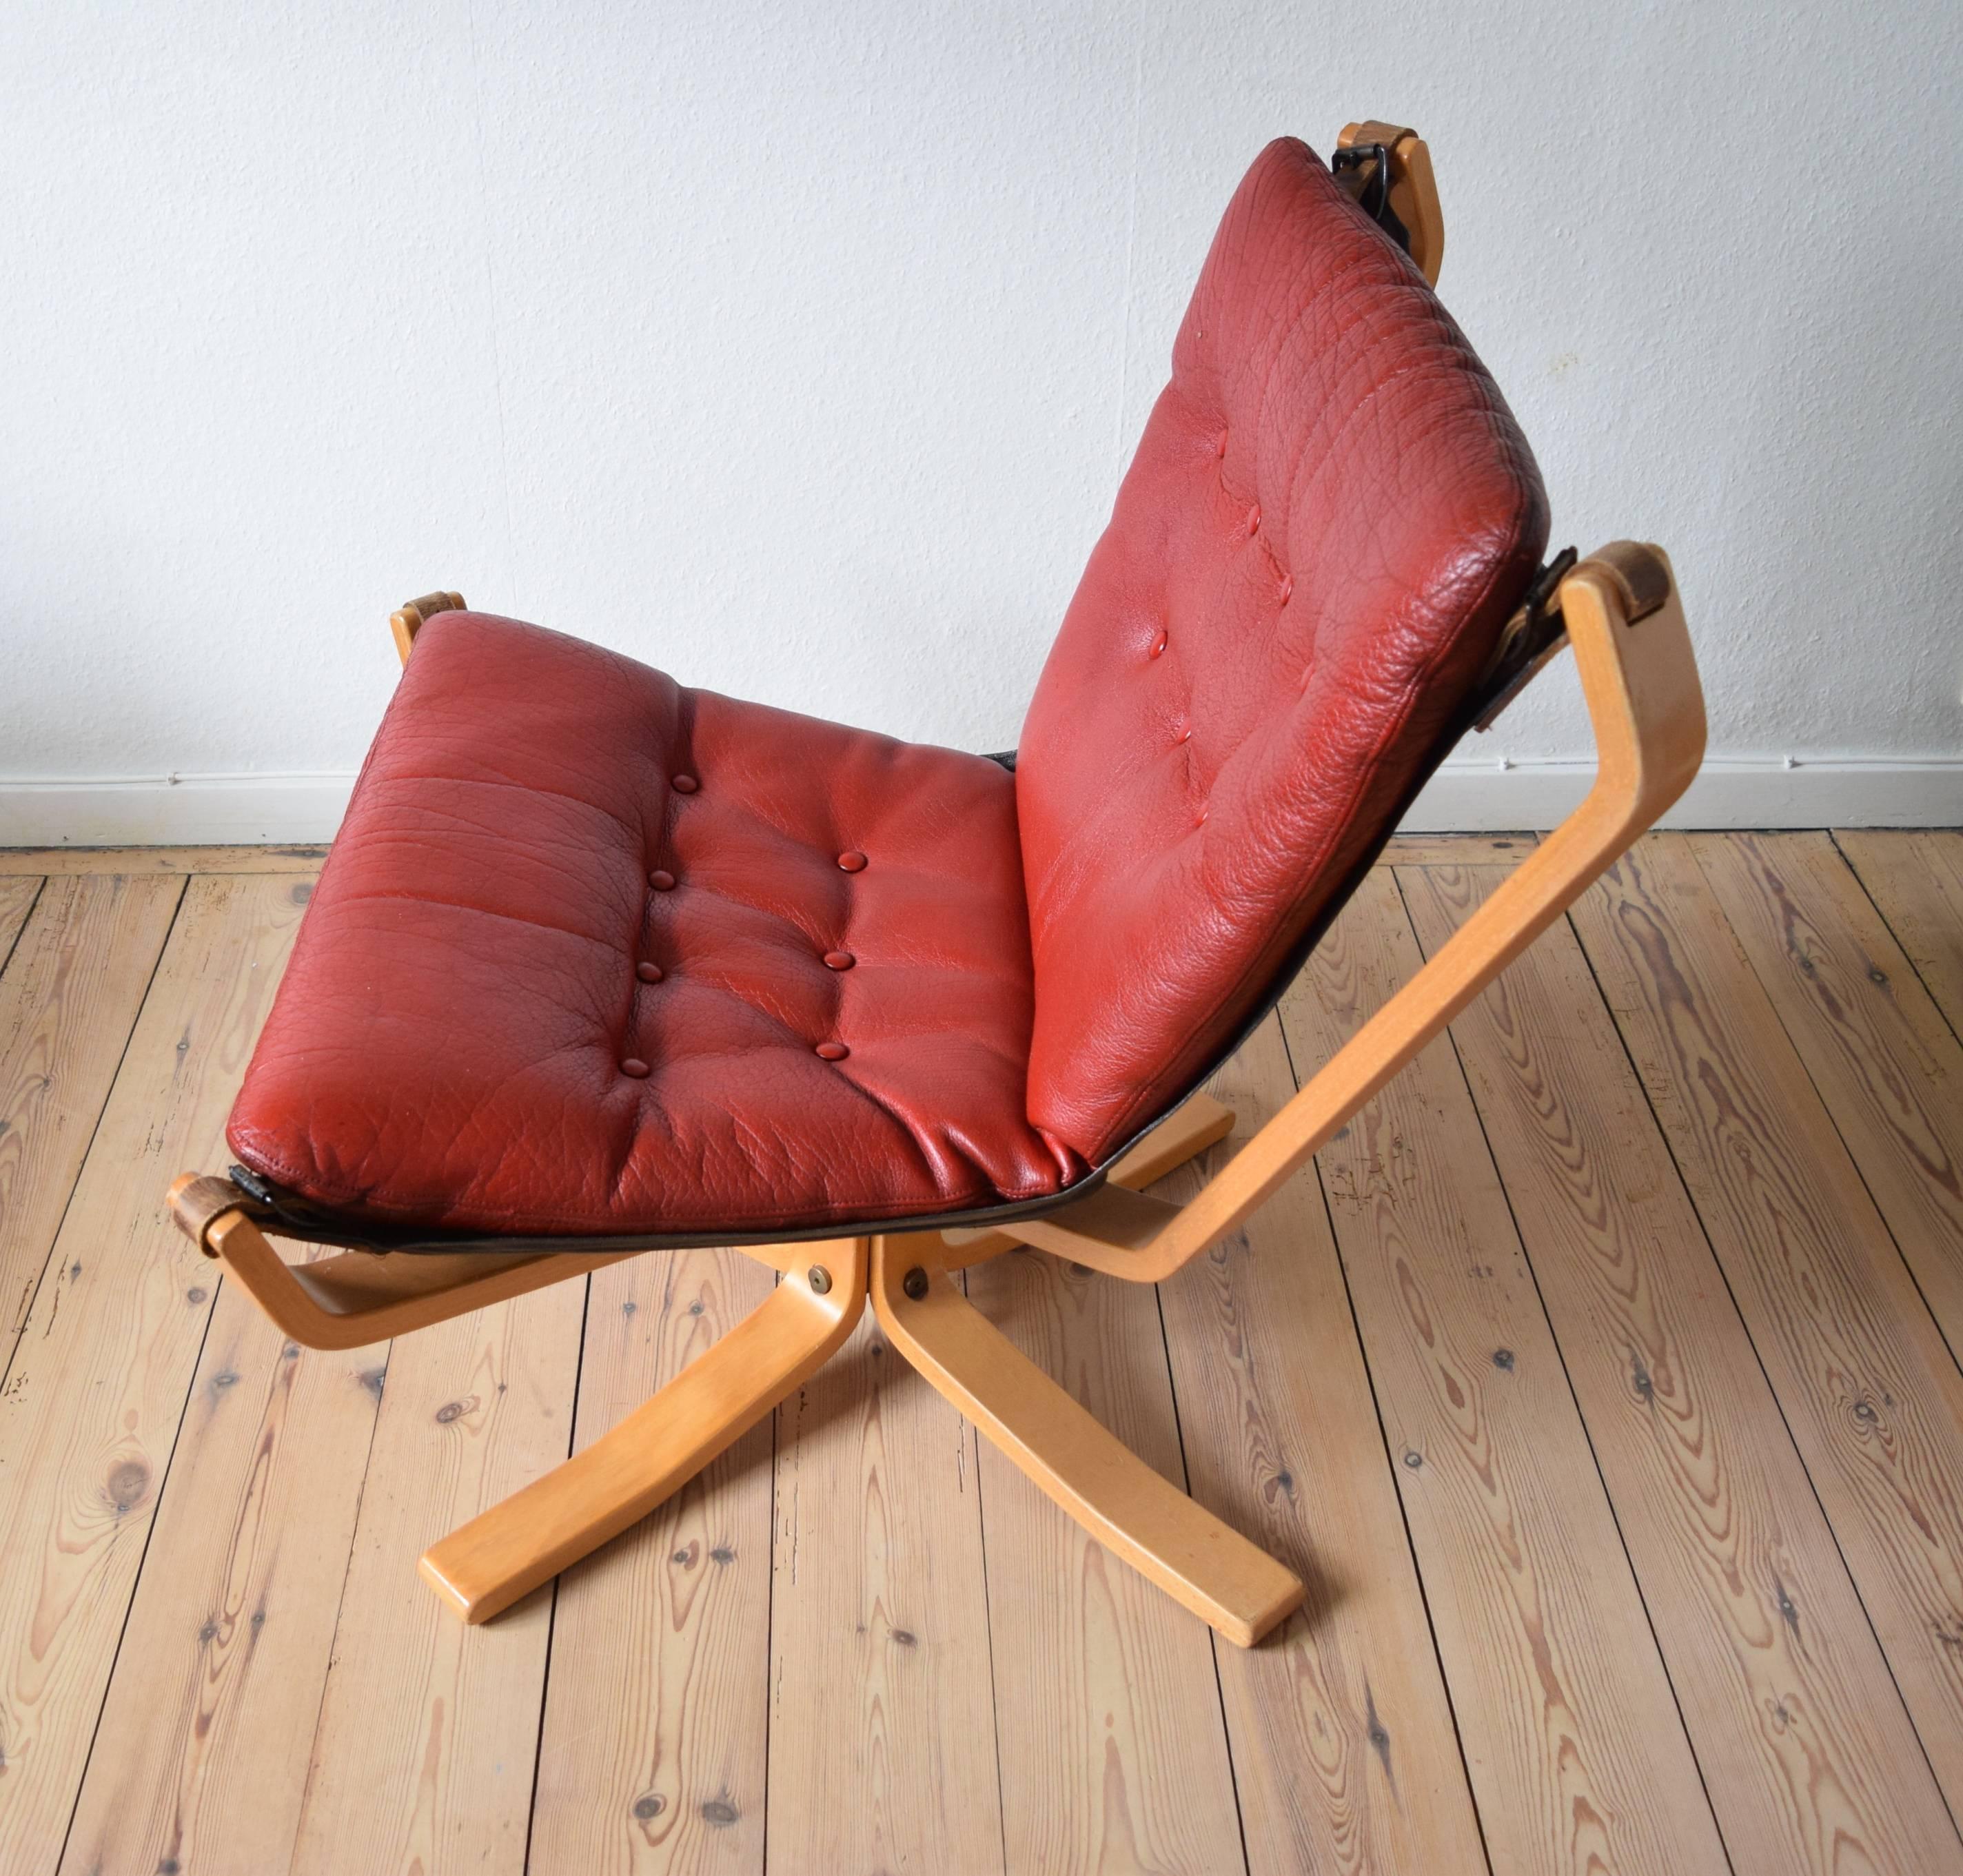 A low back Falcon chair designed by Sigurd Ressell and manufactured in Denmark in the 1970s. The chair features a bent beechwood frame, with a buffalo leather cushion. Buffalo hides are thick and durable as they are not stretched during the tanning